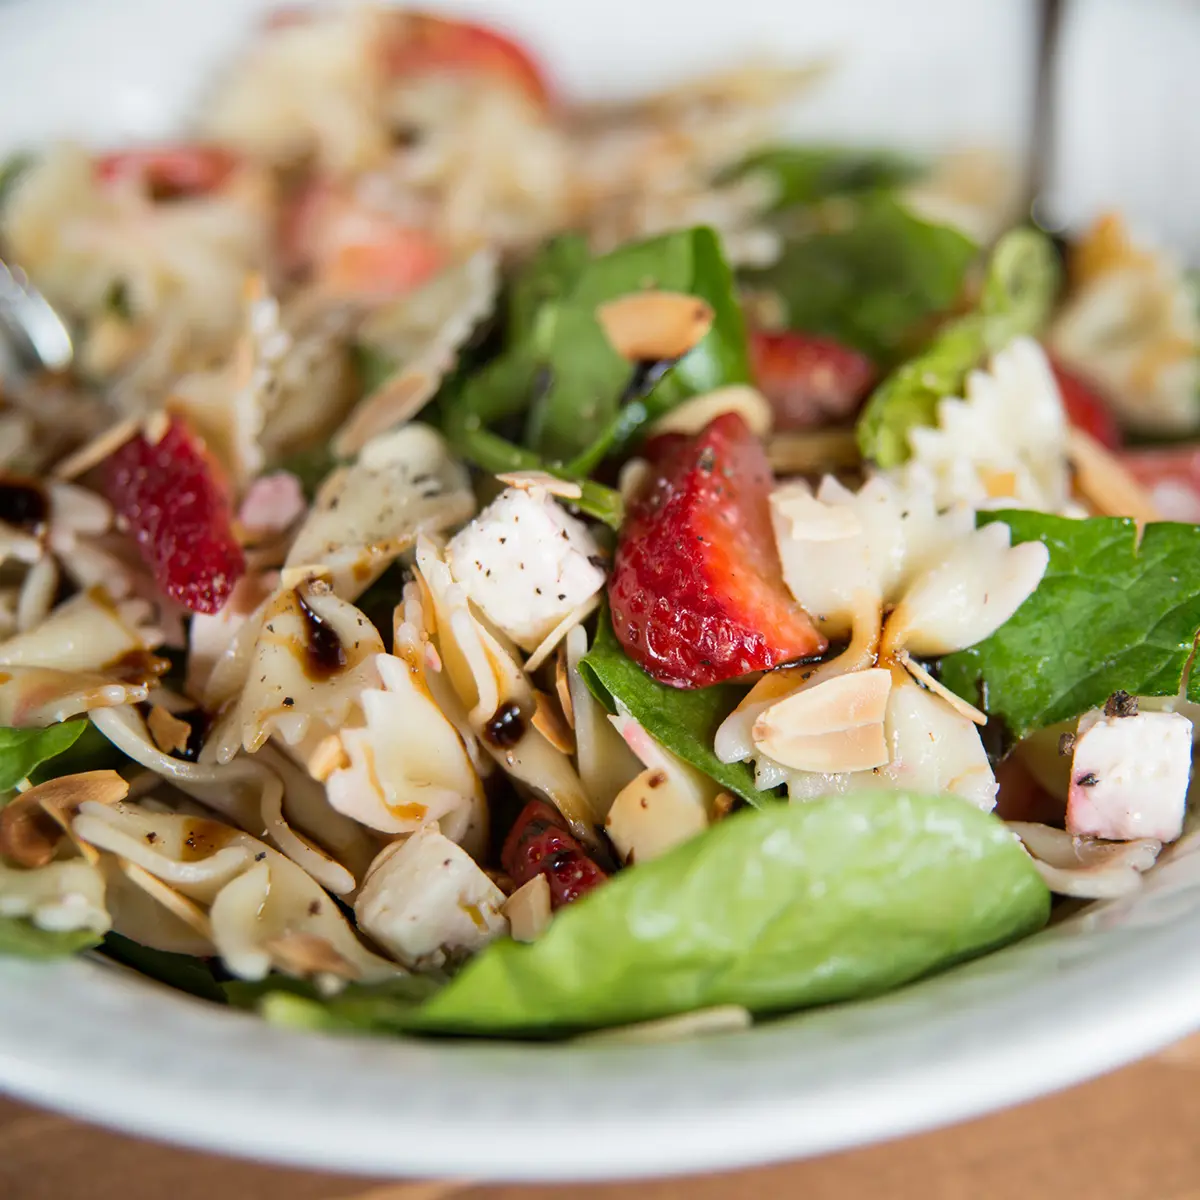 Pasta salad with leeks, spinach, strawberries, sliced almonds and feta cheese